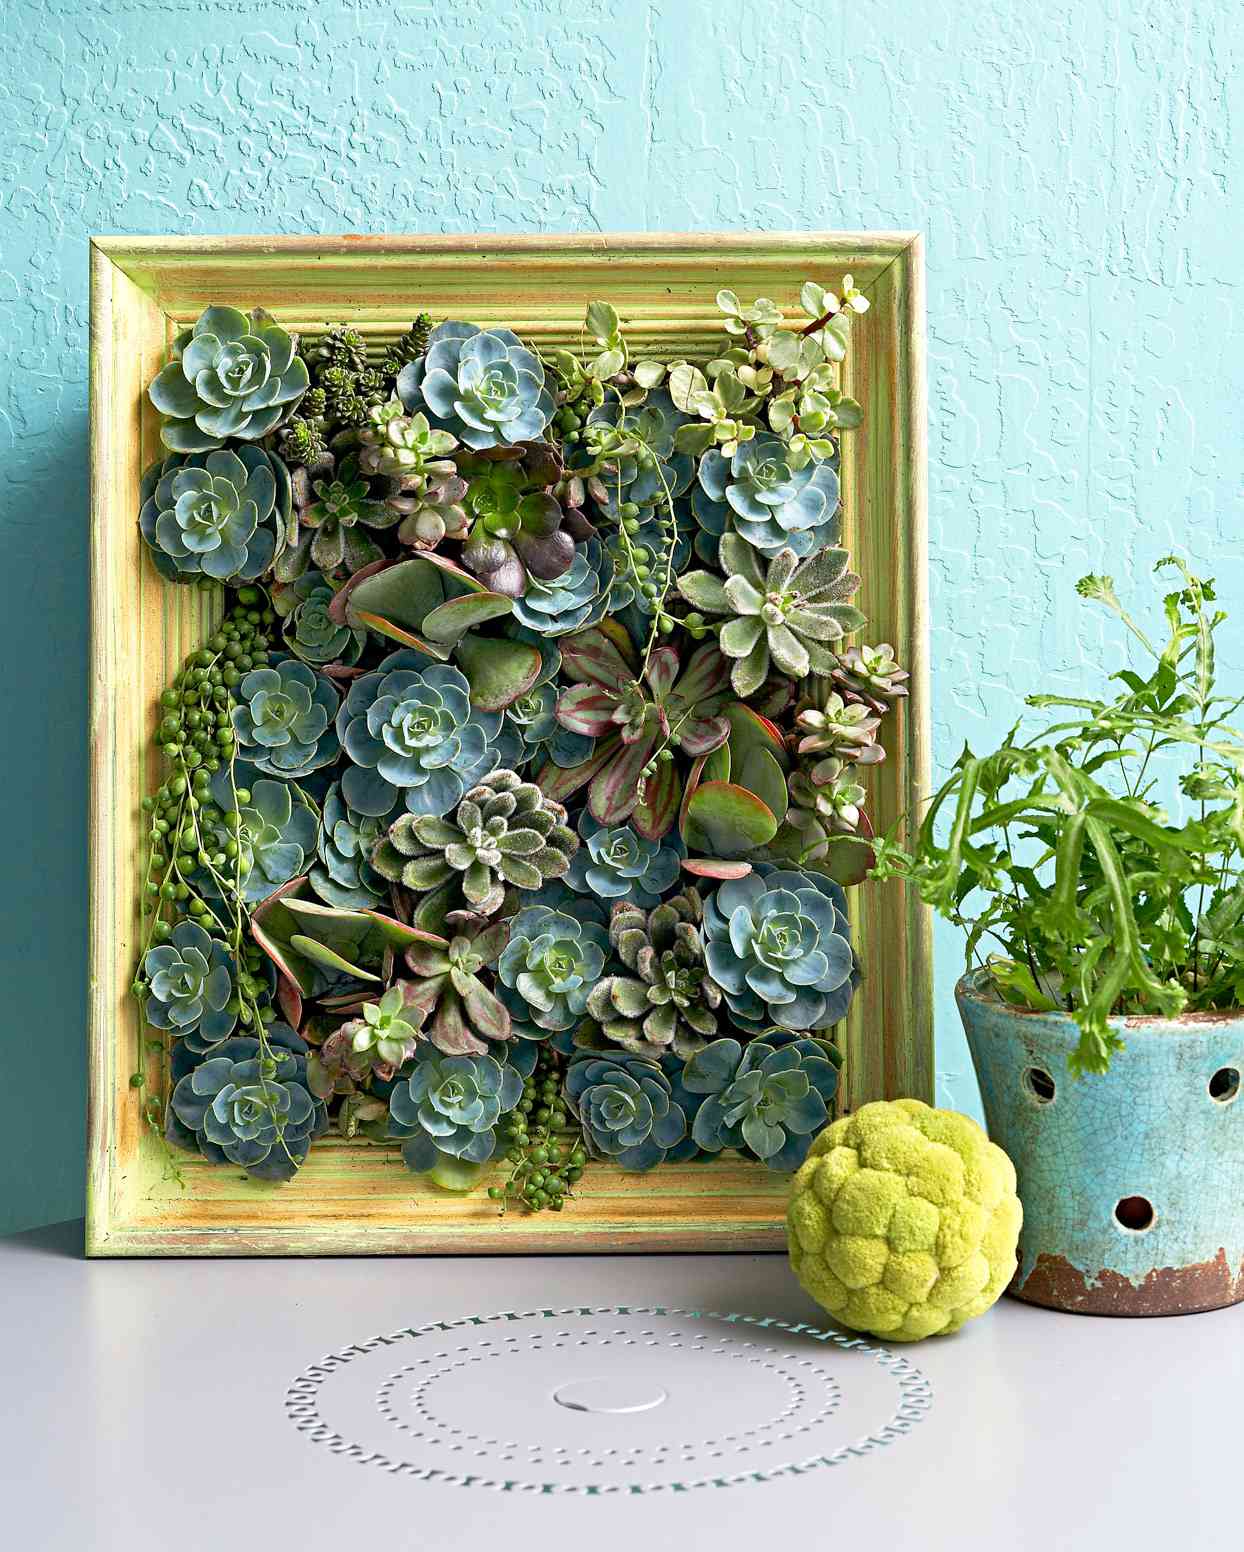 Let's Stay Home Photo Ledge Picture Frame and Succulent